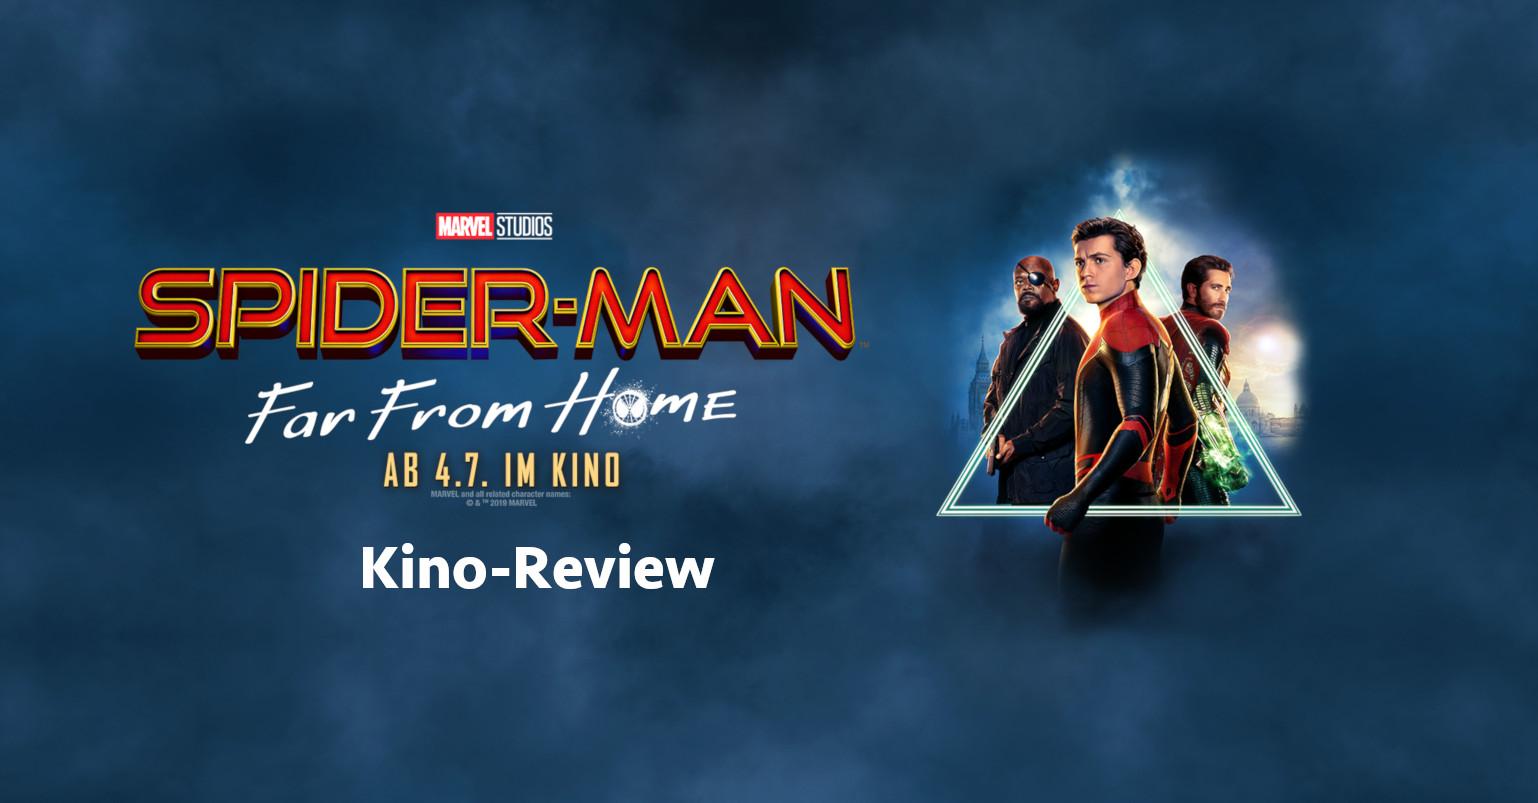 Spiderman Far From Home Kinoreview Artikelbild